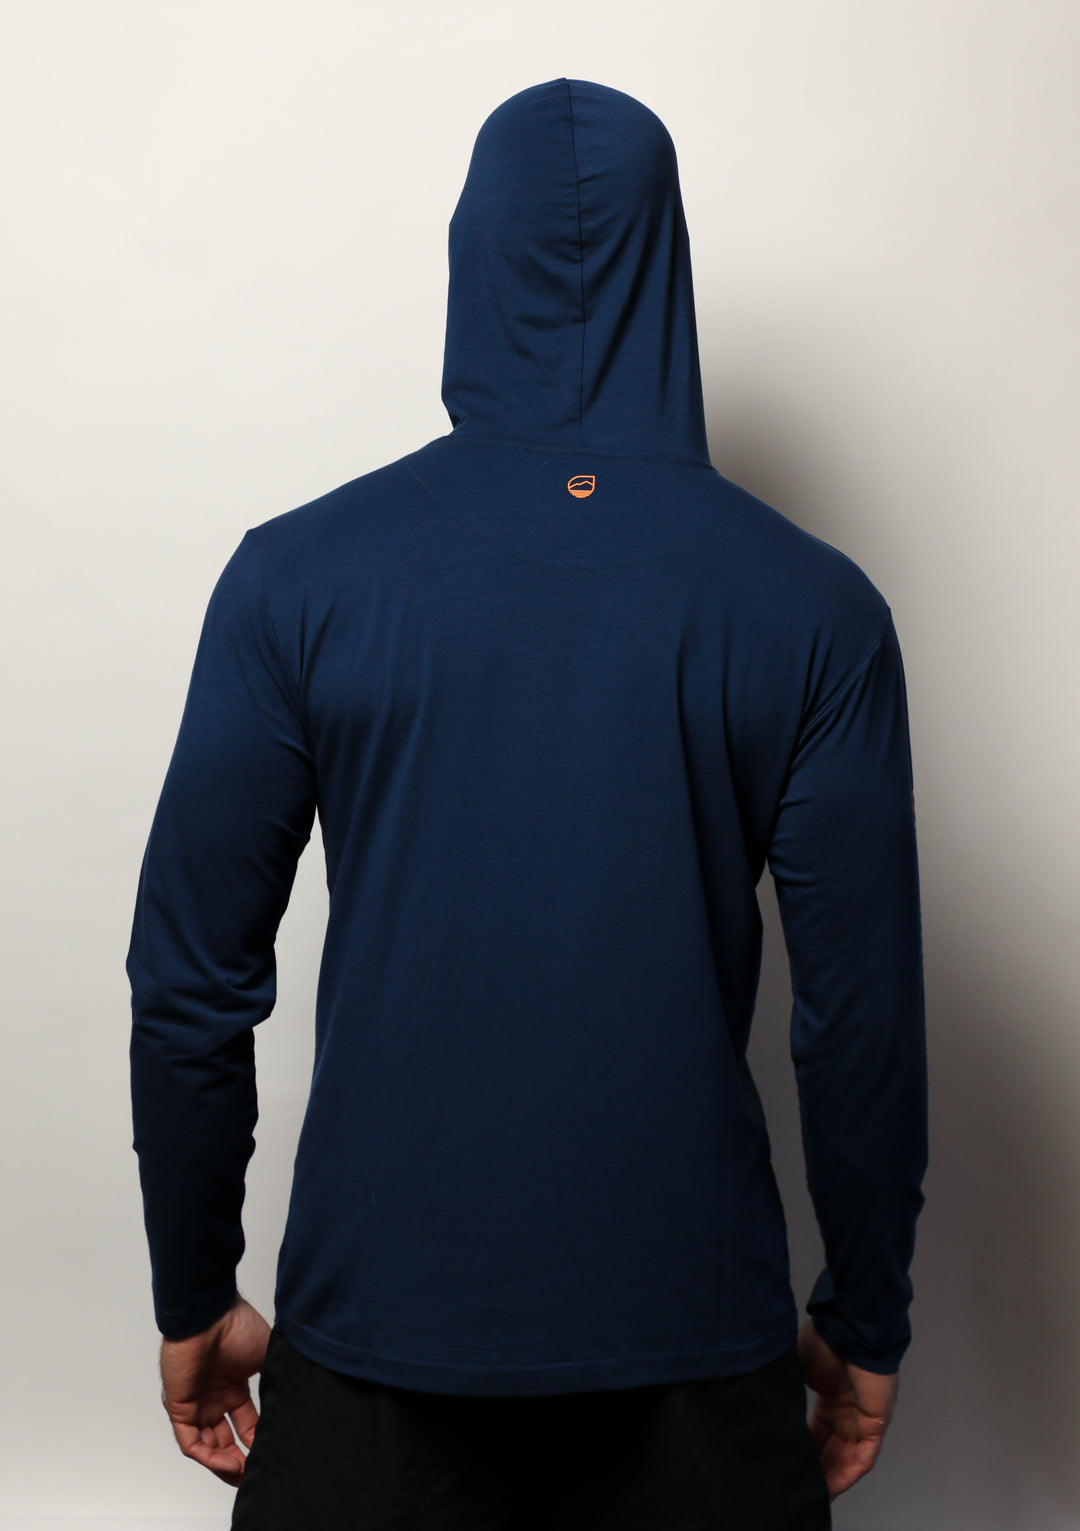 Men's Long Sleeve Hooded Shirt, UPF 45 Bamboo, Crescent City Collection